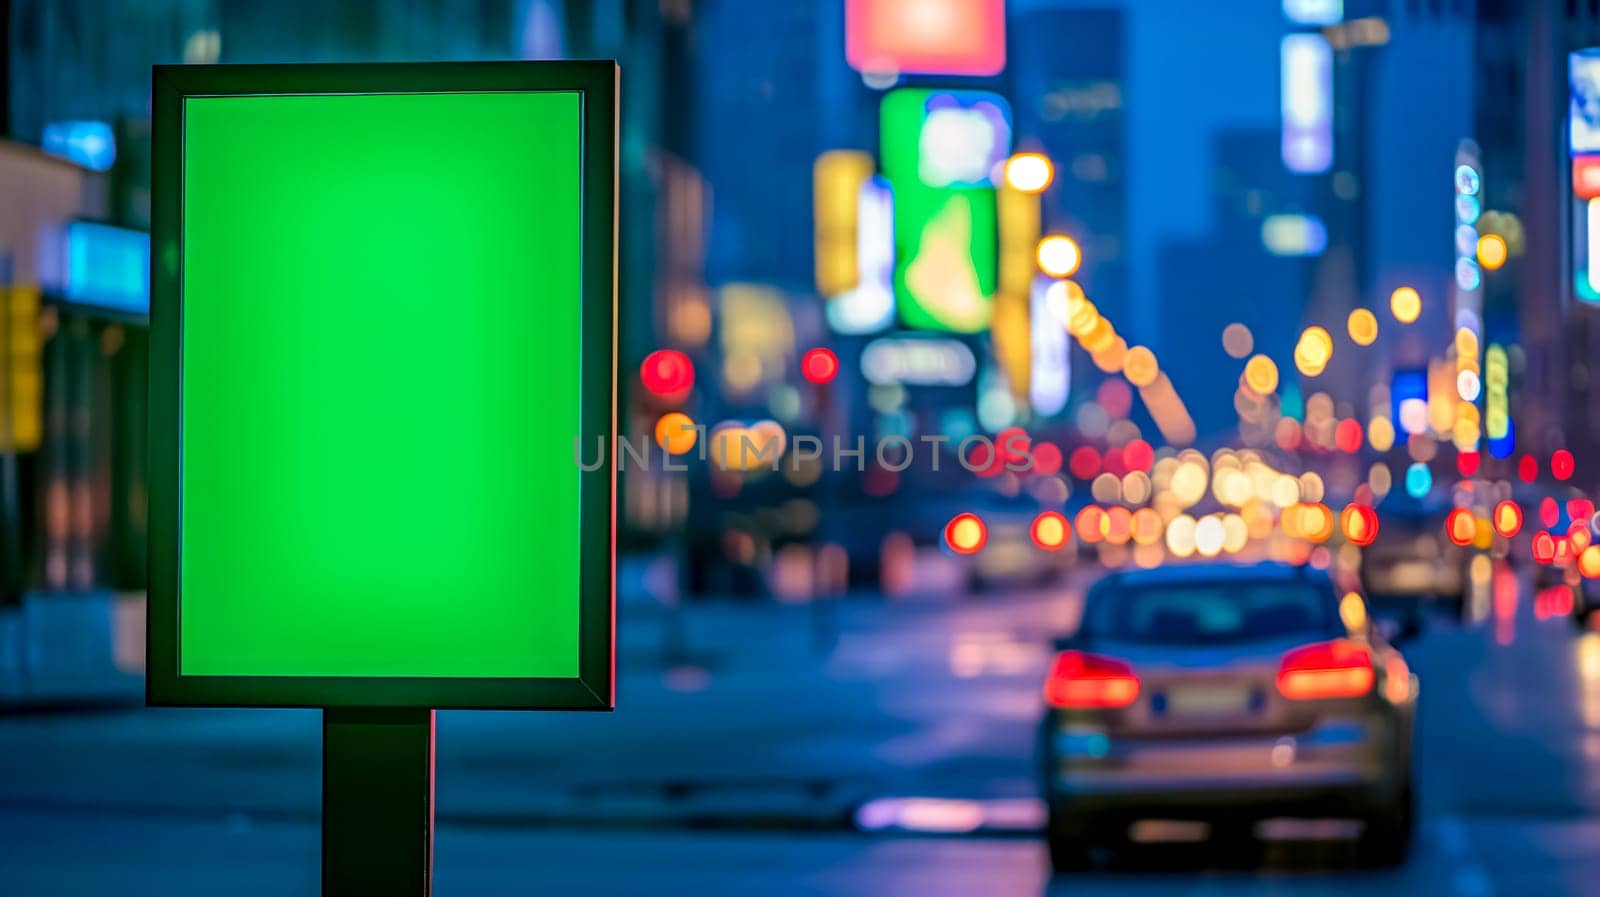 urban night scene with a green screen on a street-side advertising banner, blurred city lights and traffic in the background, creating a bokeh effect. by Edophoto